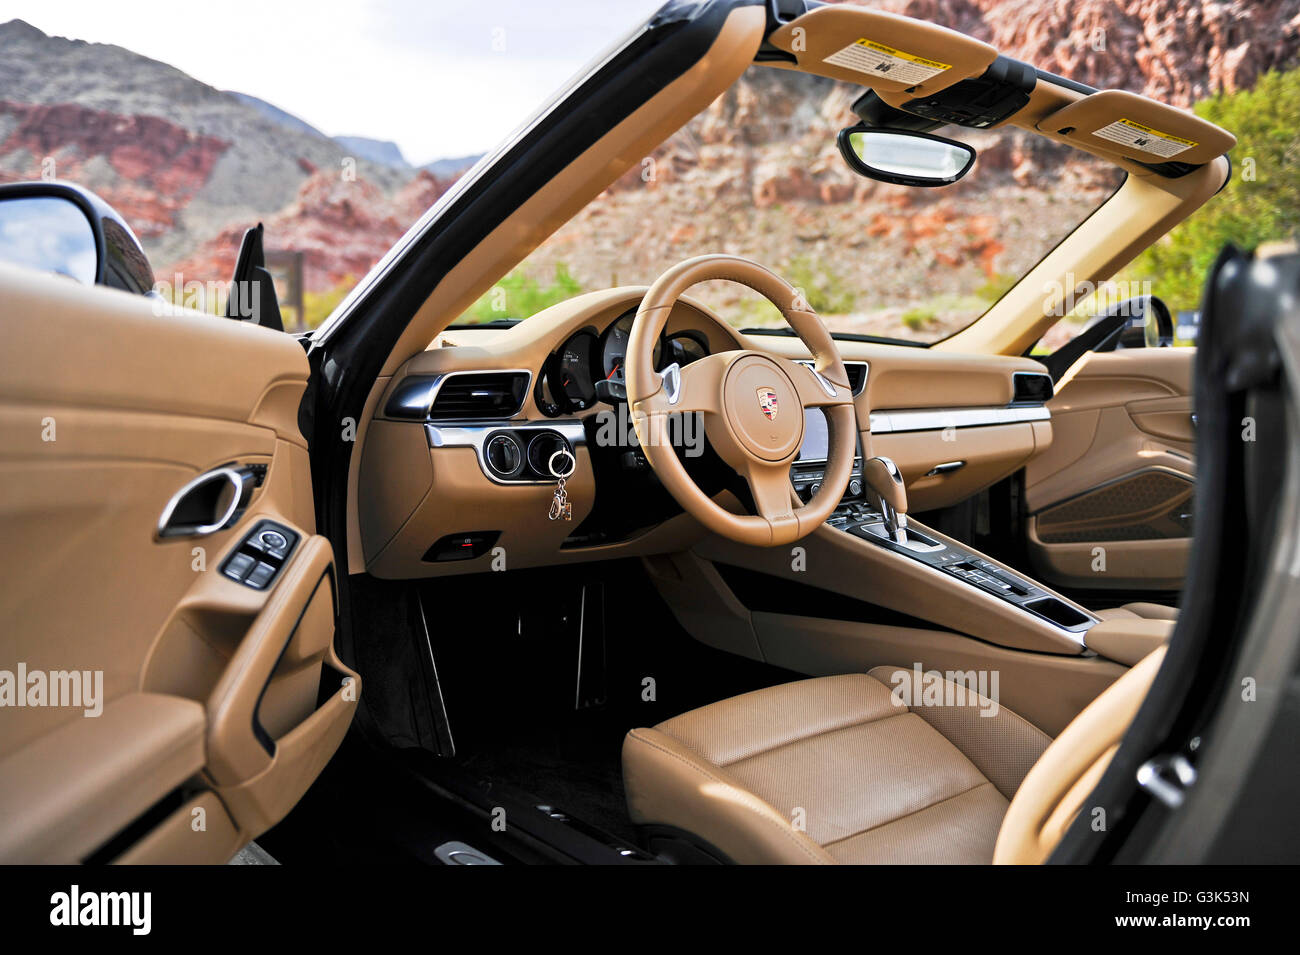 The interior dashboard, steering wheel and console of a Porsche 911 Carrera S on a desert mountain road Stock Photo